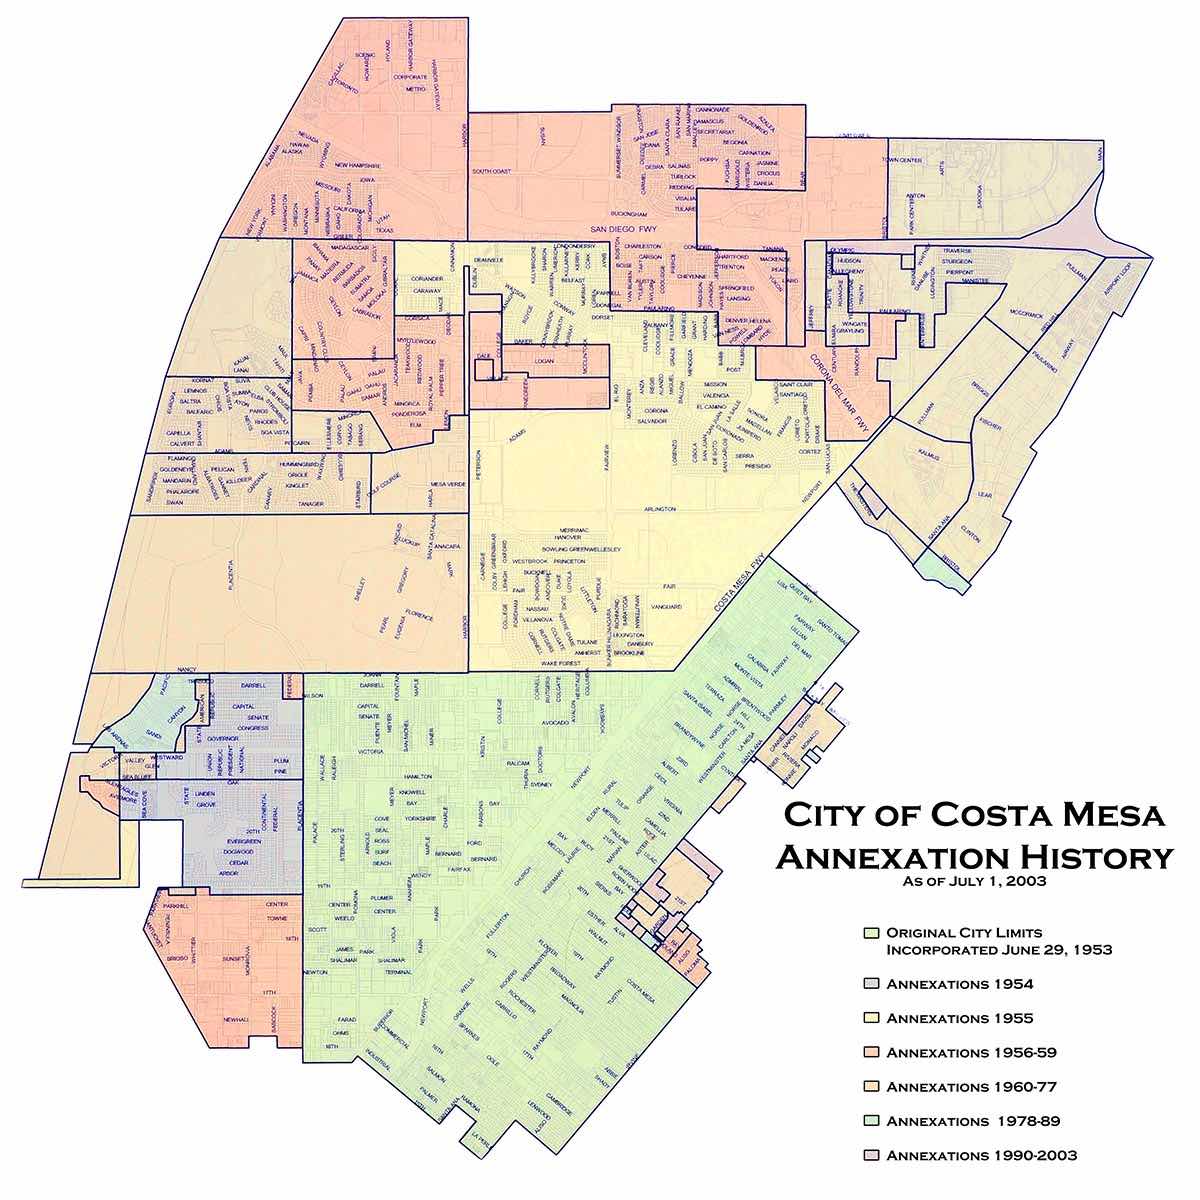 Costa Mesa bit by bit: Annexation Map for the City of Costa Mesa (courtesy of the Costa Mesa Historical Society)